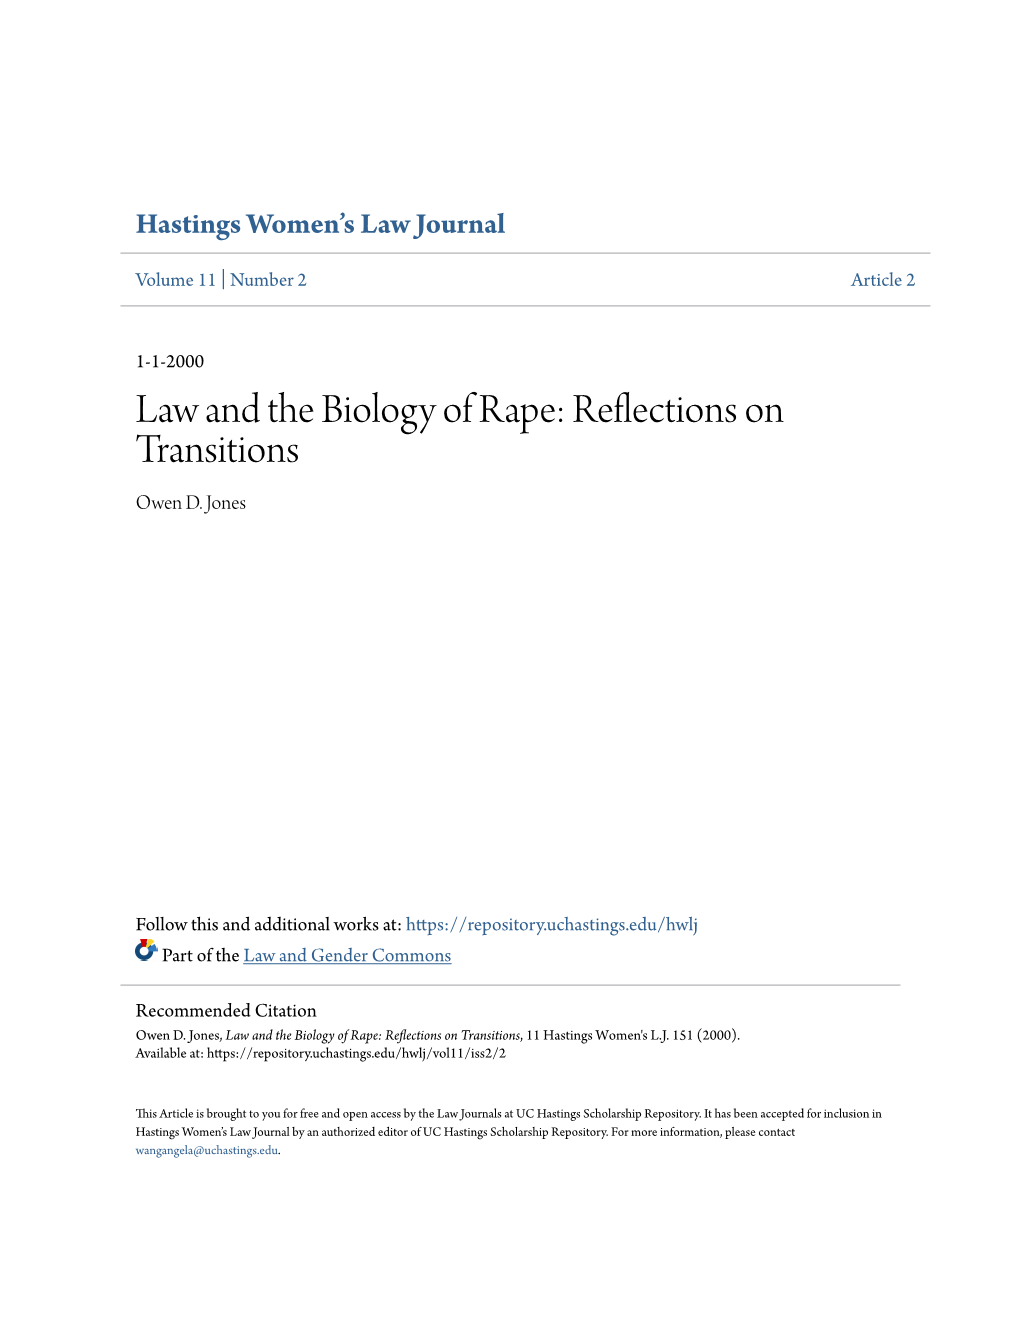 Law and the Biology of Rape: Reflections on Transitions Owen D